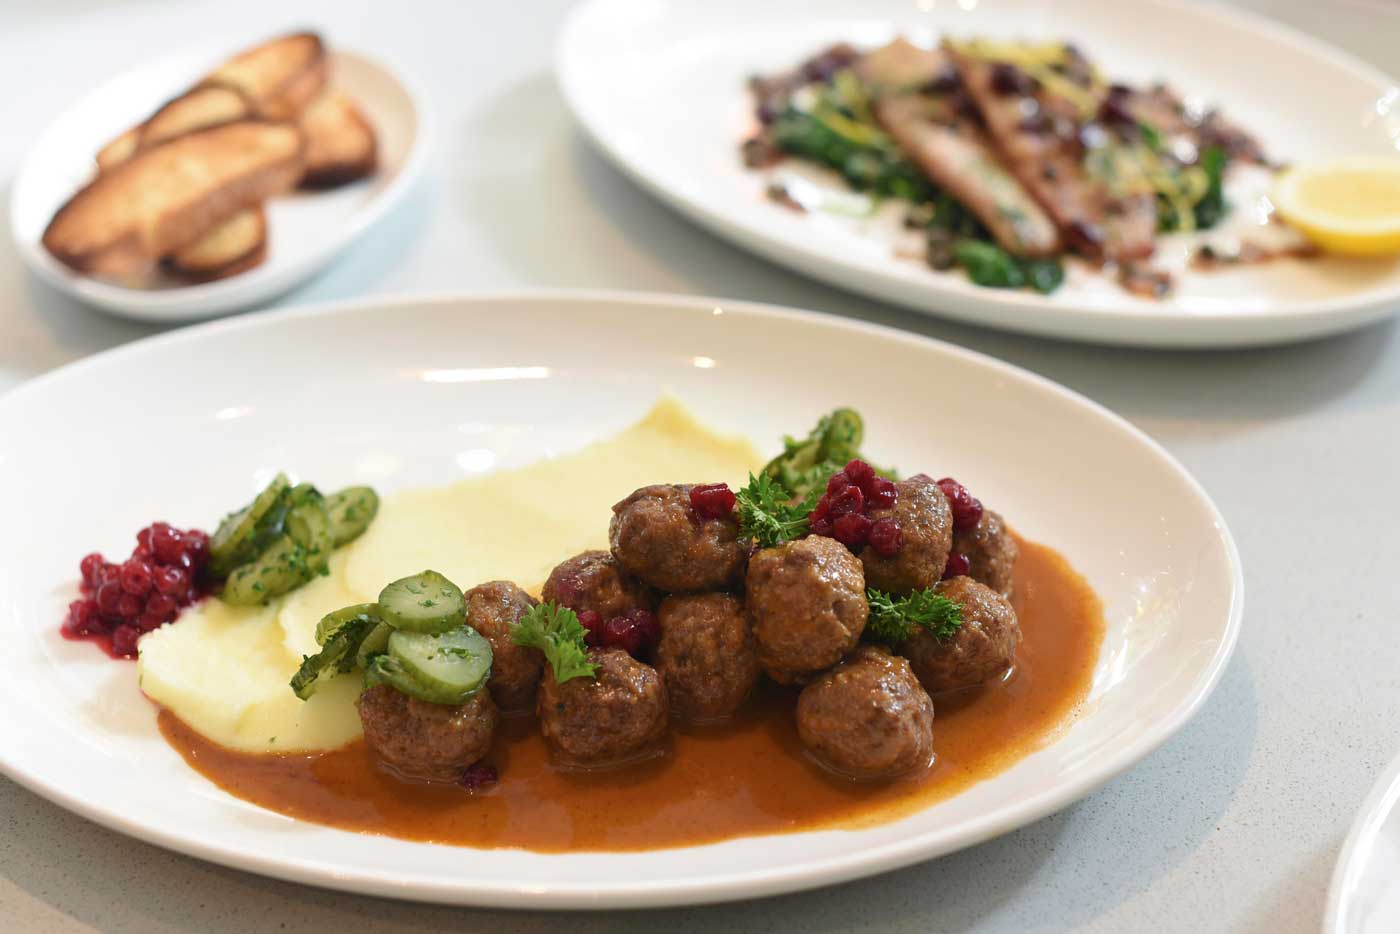 The Swedish Meatballs at Volta don't compare to the ones you can find at IKEA, though chef Staffan Terje lives in the Oakland area, not far from IKEA.